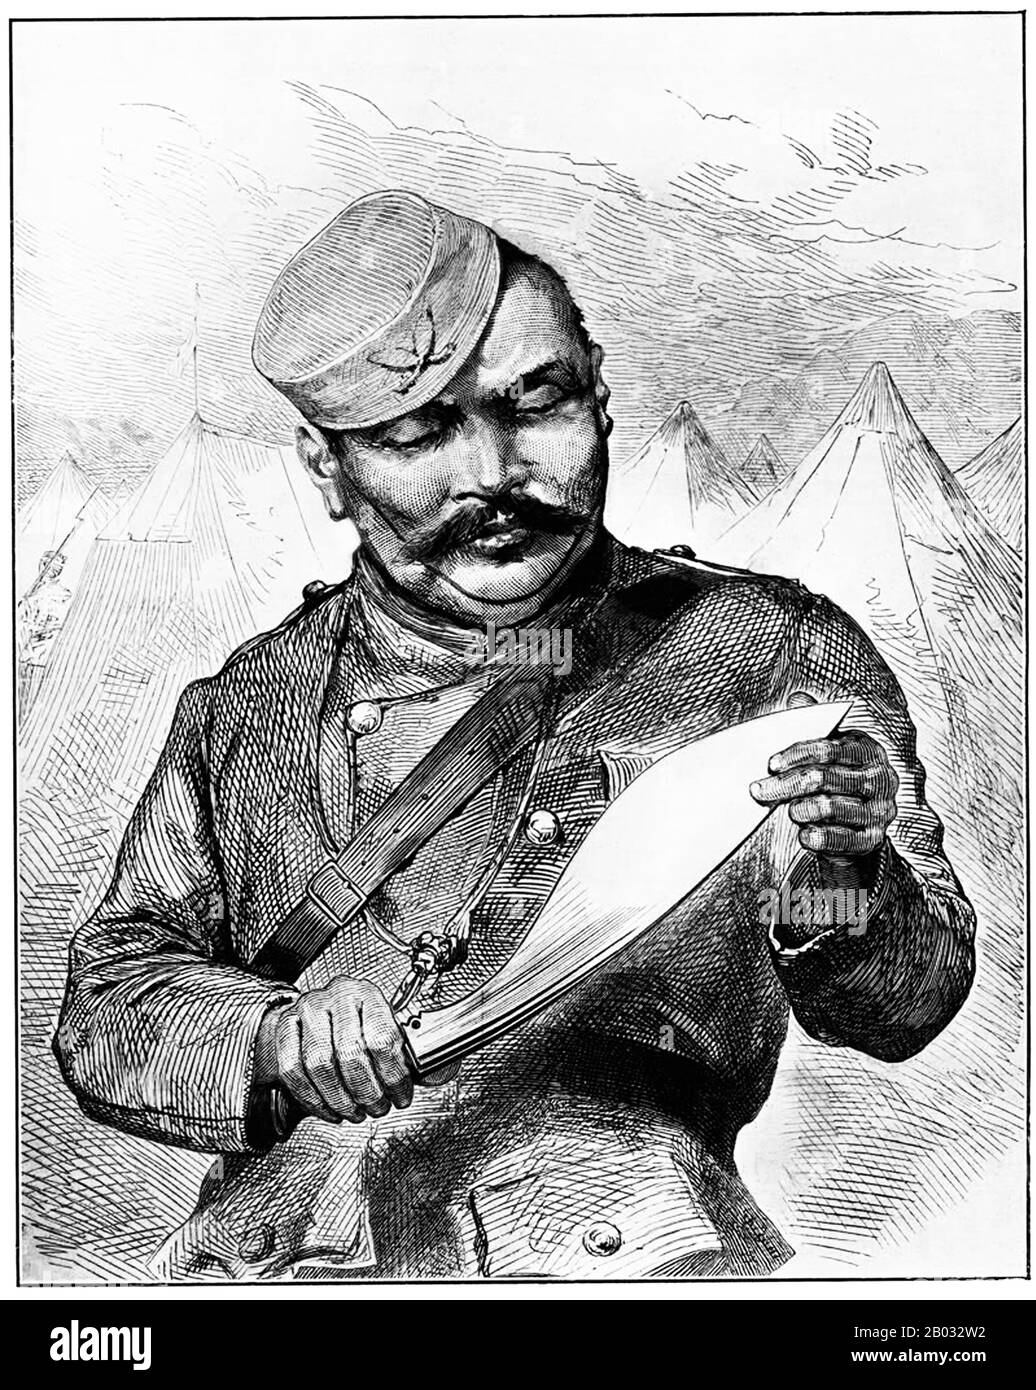 The Gurkhas are soldiers from Nepal. The name may be traced to the medieval Hindu warrior-saint Guru Gorakhnath who has a historic shrine in Gorkha, Nepal.  Gurkhas are closely associated with the khukuri, a forward-curving Nepalese knife and have a well known reputation for their fearless military prowess. The former Indian Army Chief of Staff Field Marshal Sam Manekshaw, once stated that 'If a man says he is not afraid of dying, he is either lying or is a Gurkha'. Stock Photo